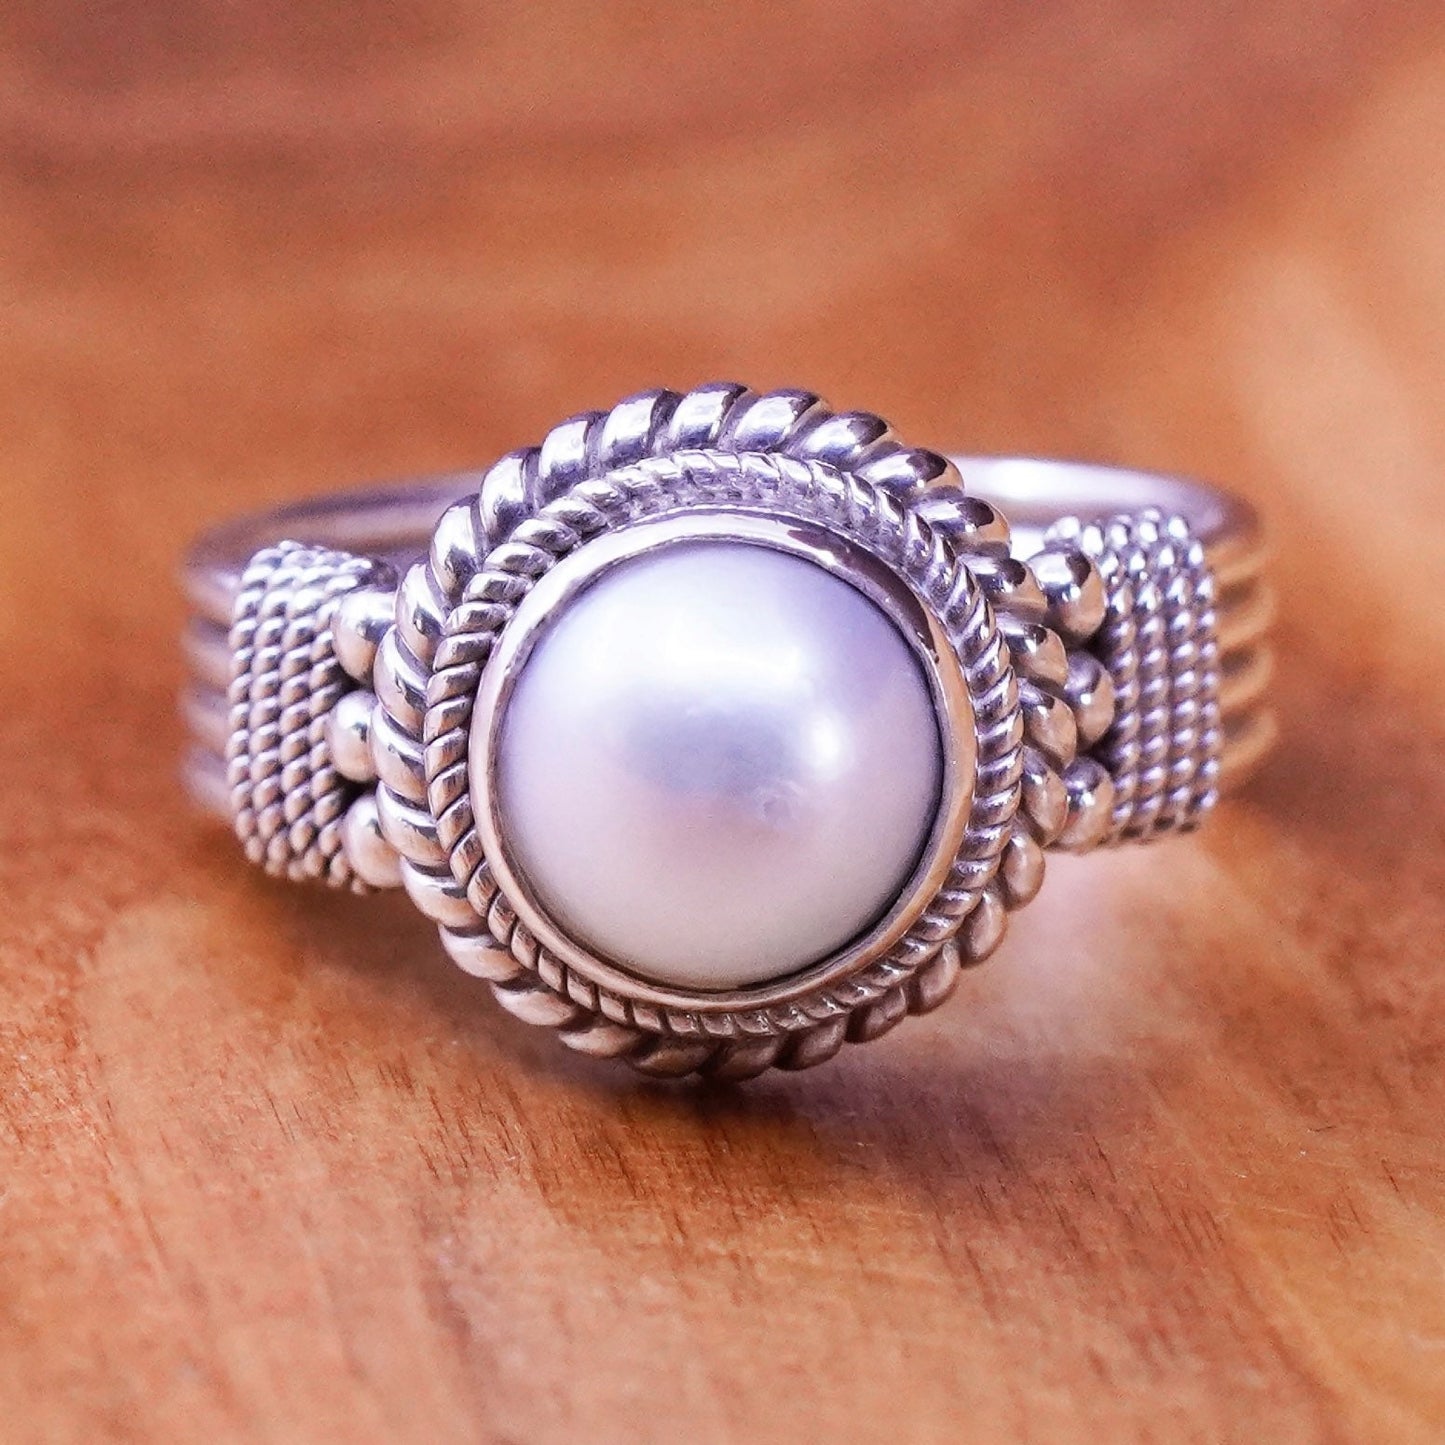 Size 6.5, vintage Sterling 925 silver handmade Pearl Ring with beads and cable